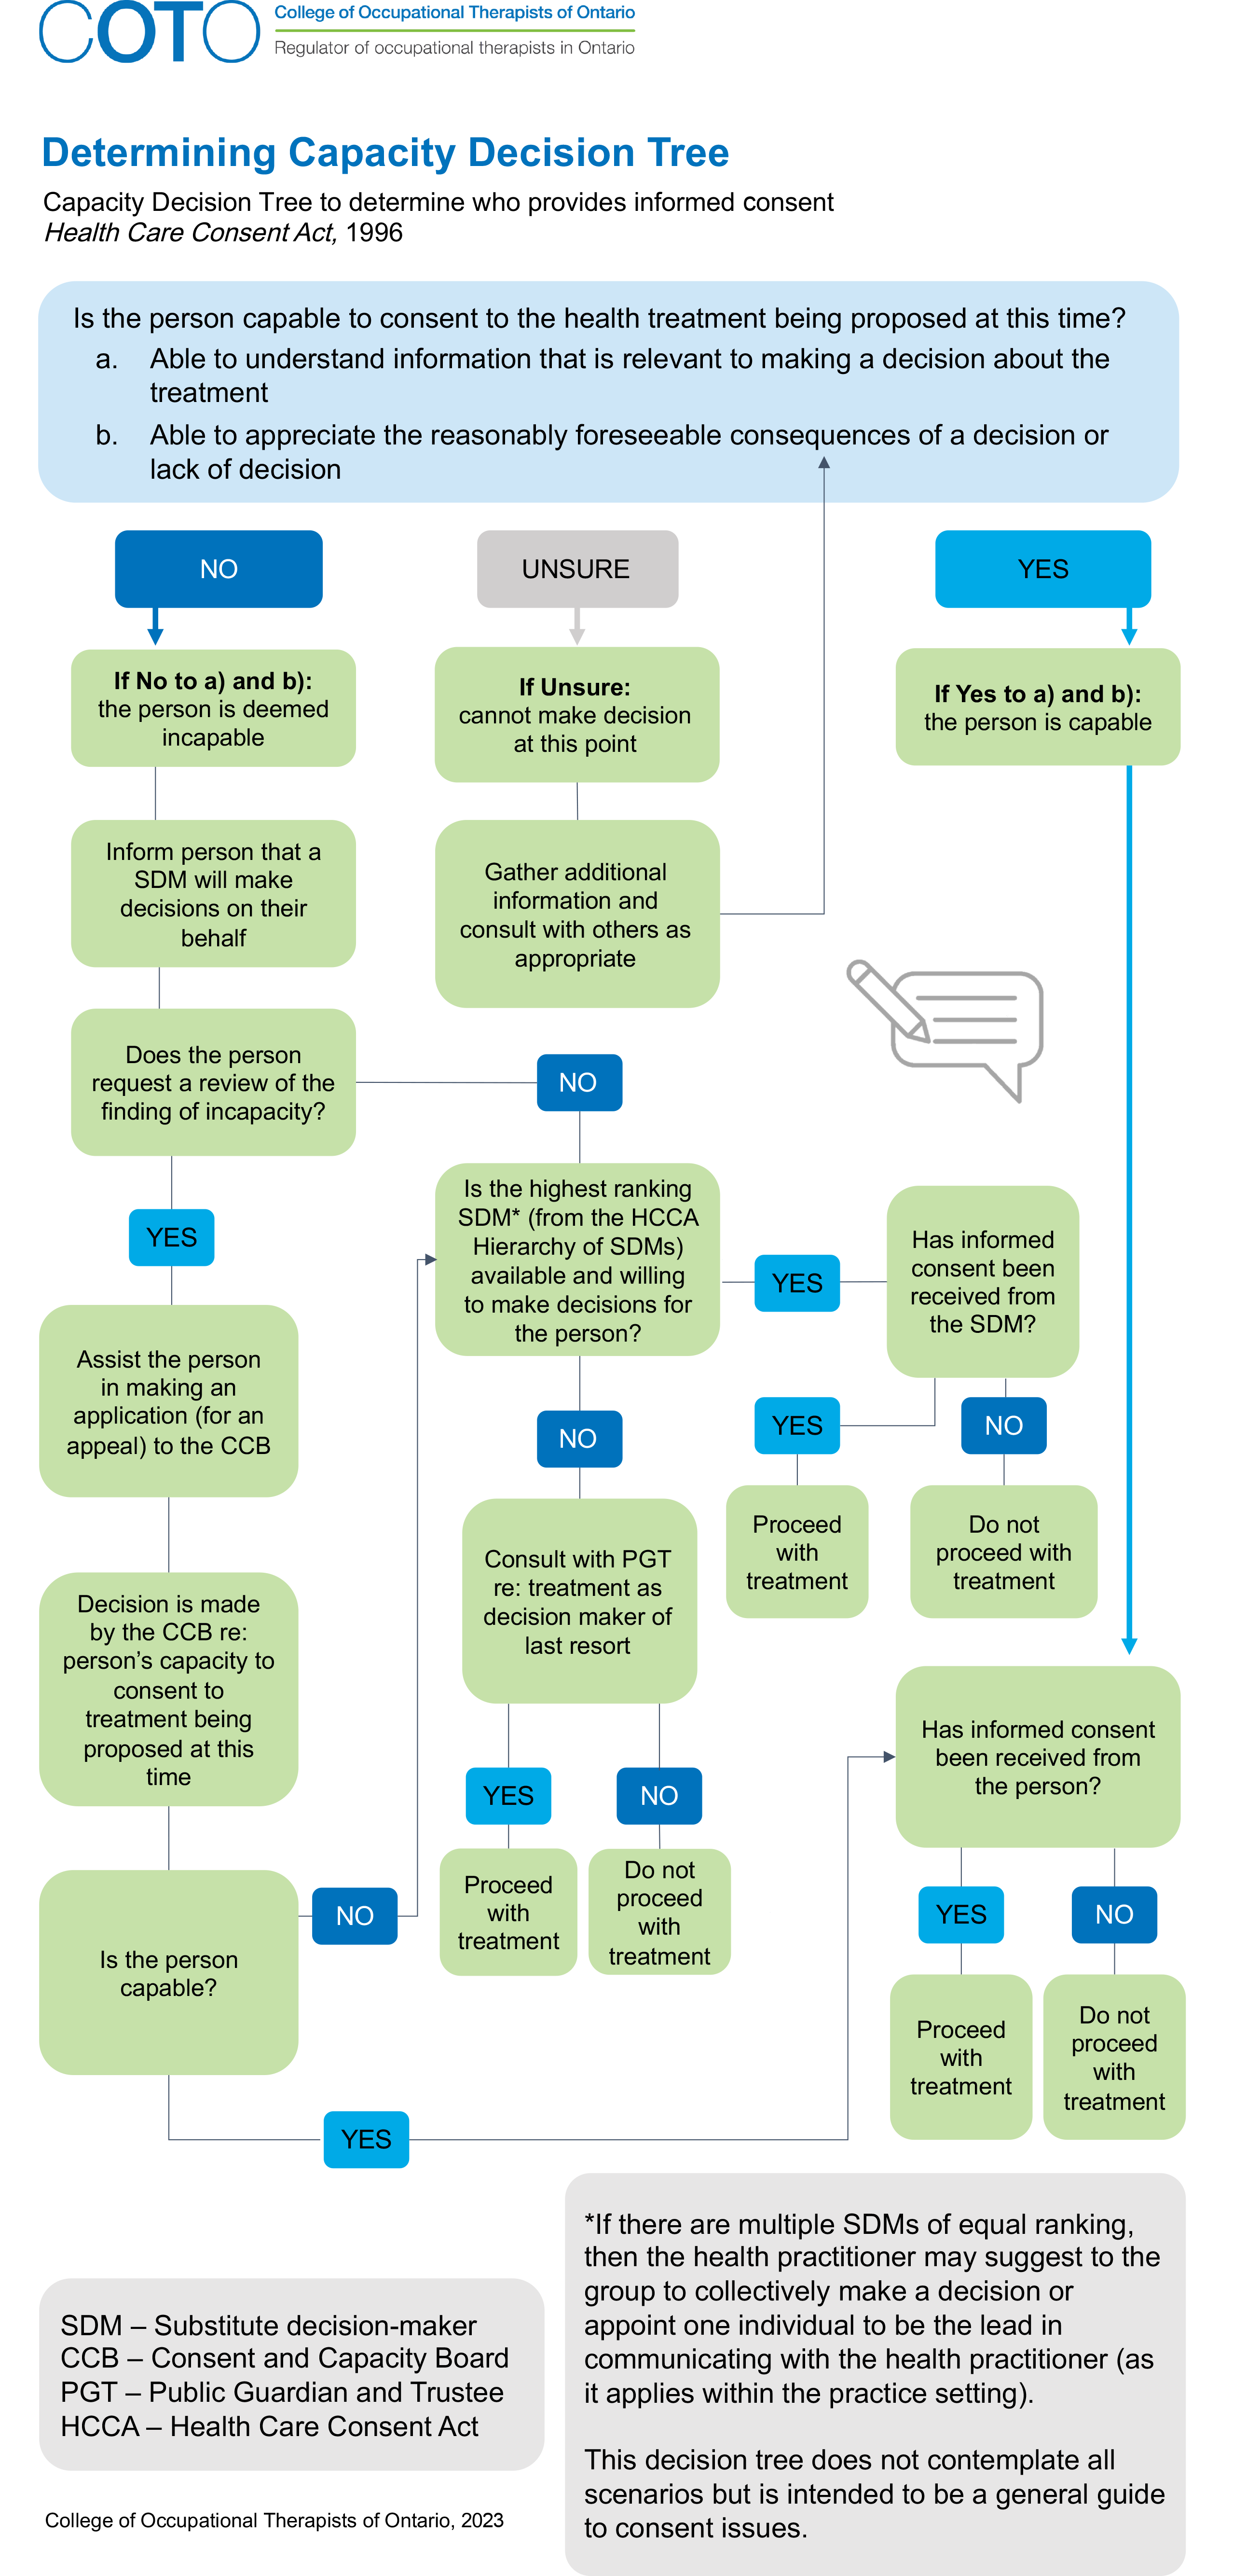 Decision tree for determining consent. See page for full process description